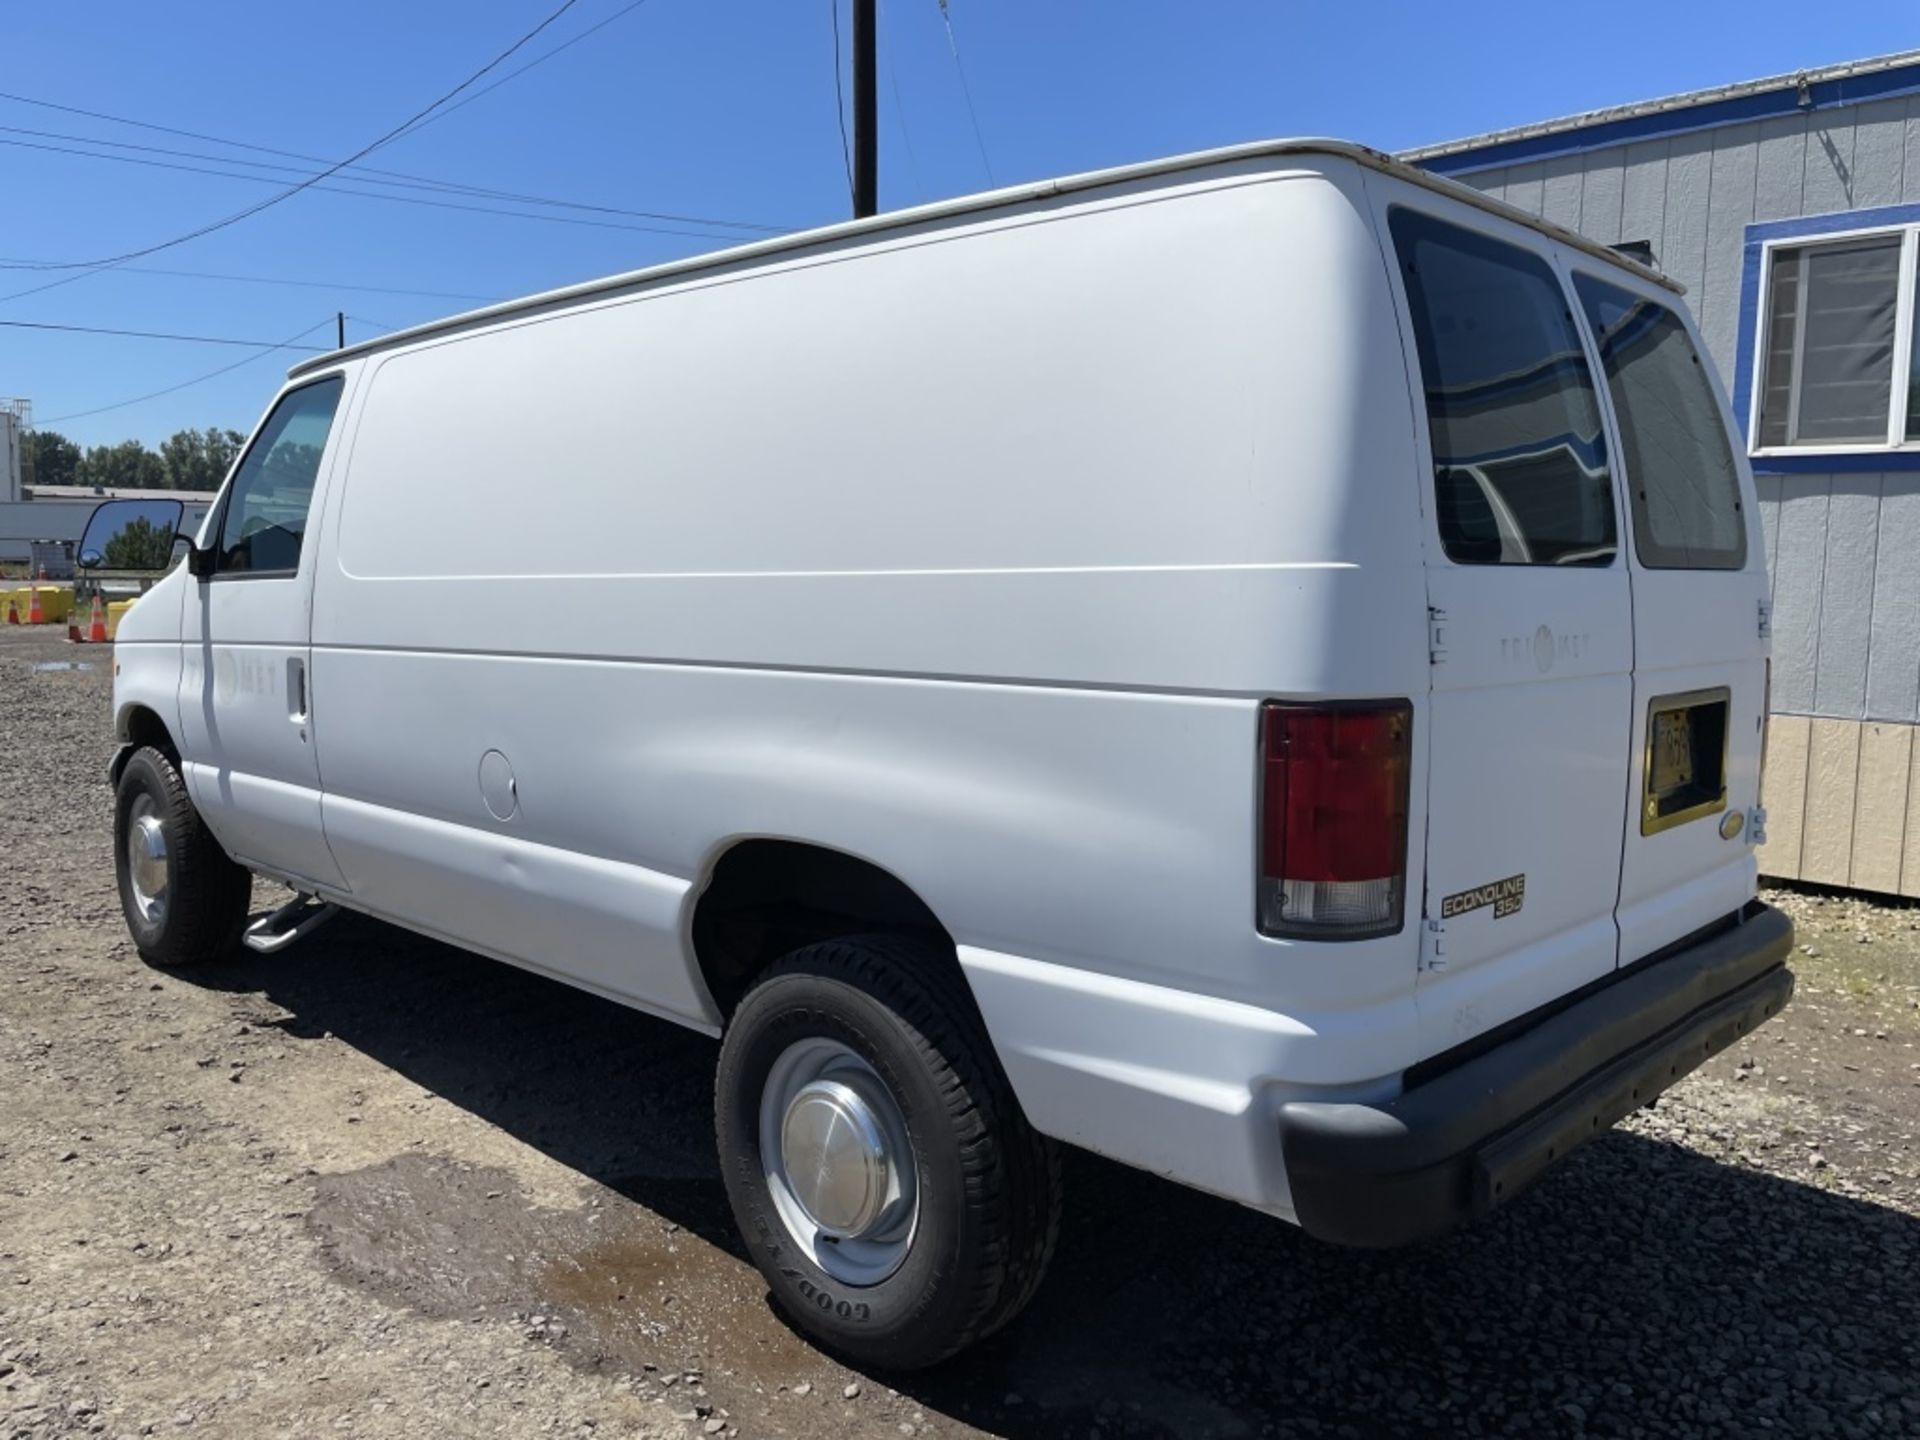 1997 Ford E-350 Cargo Van - Image 4 of 14